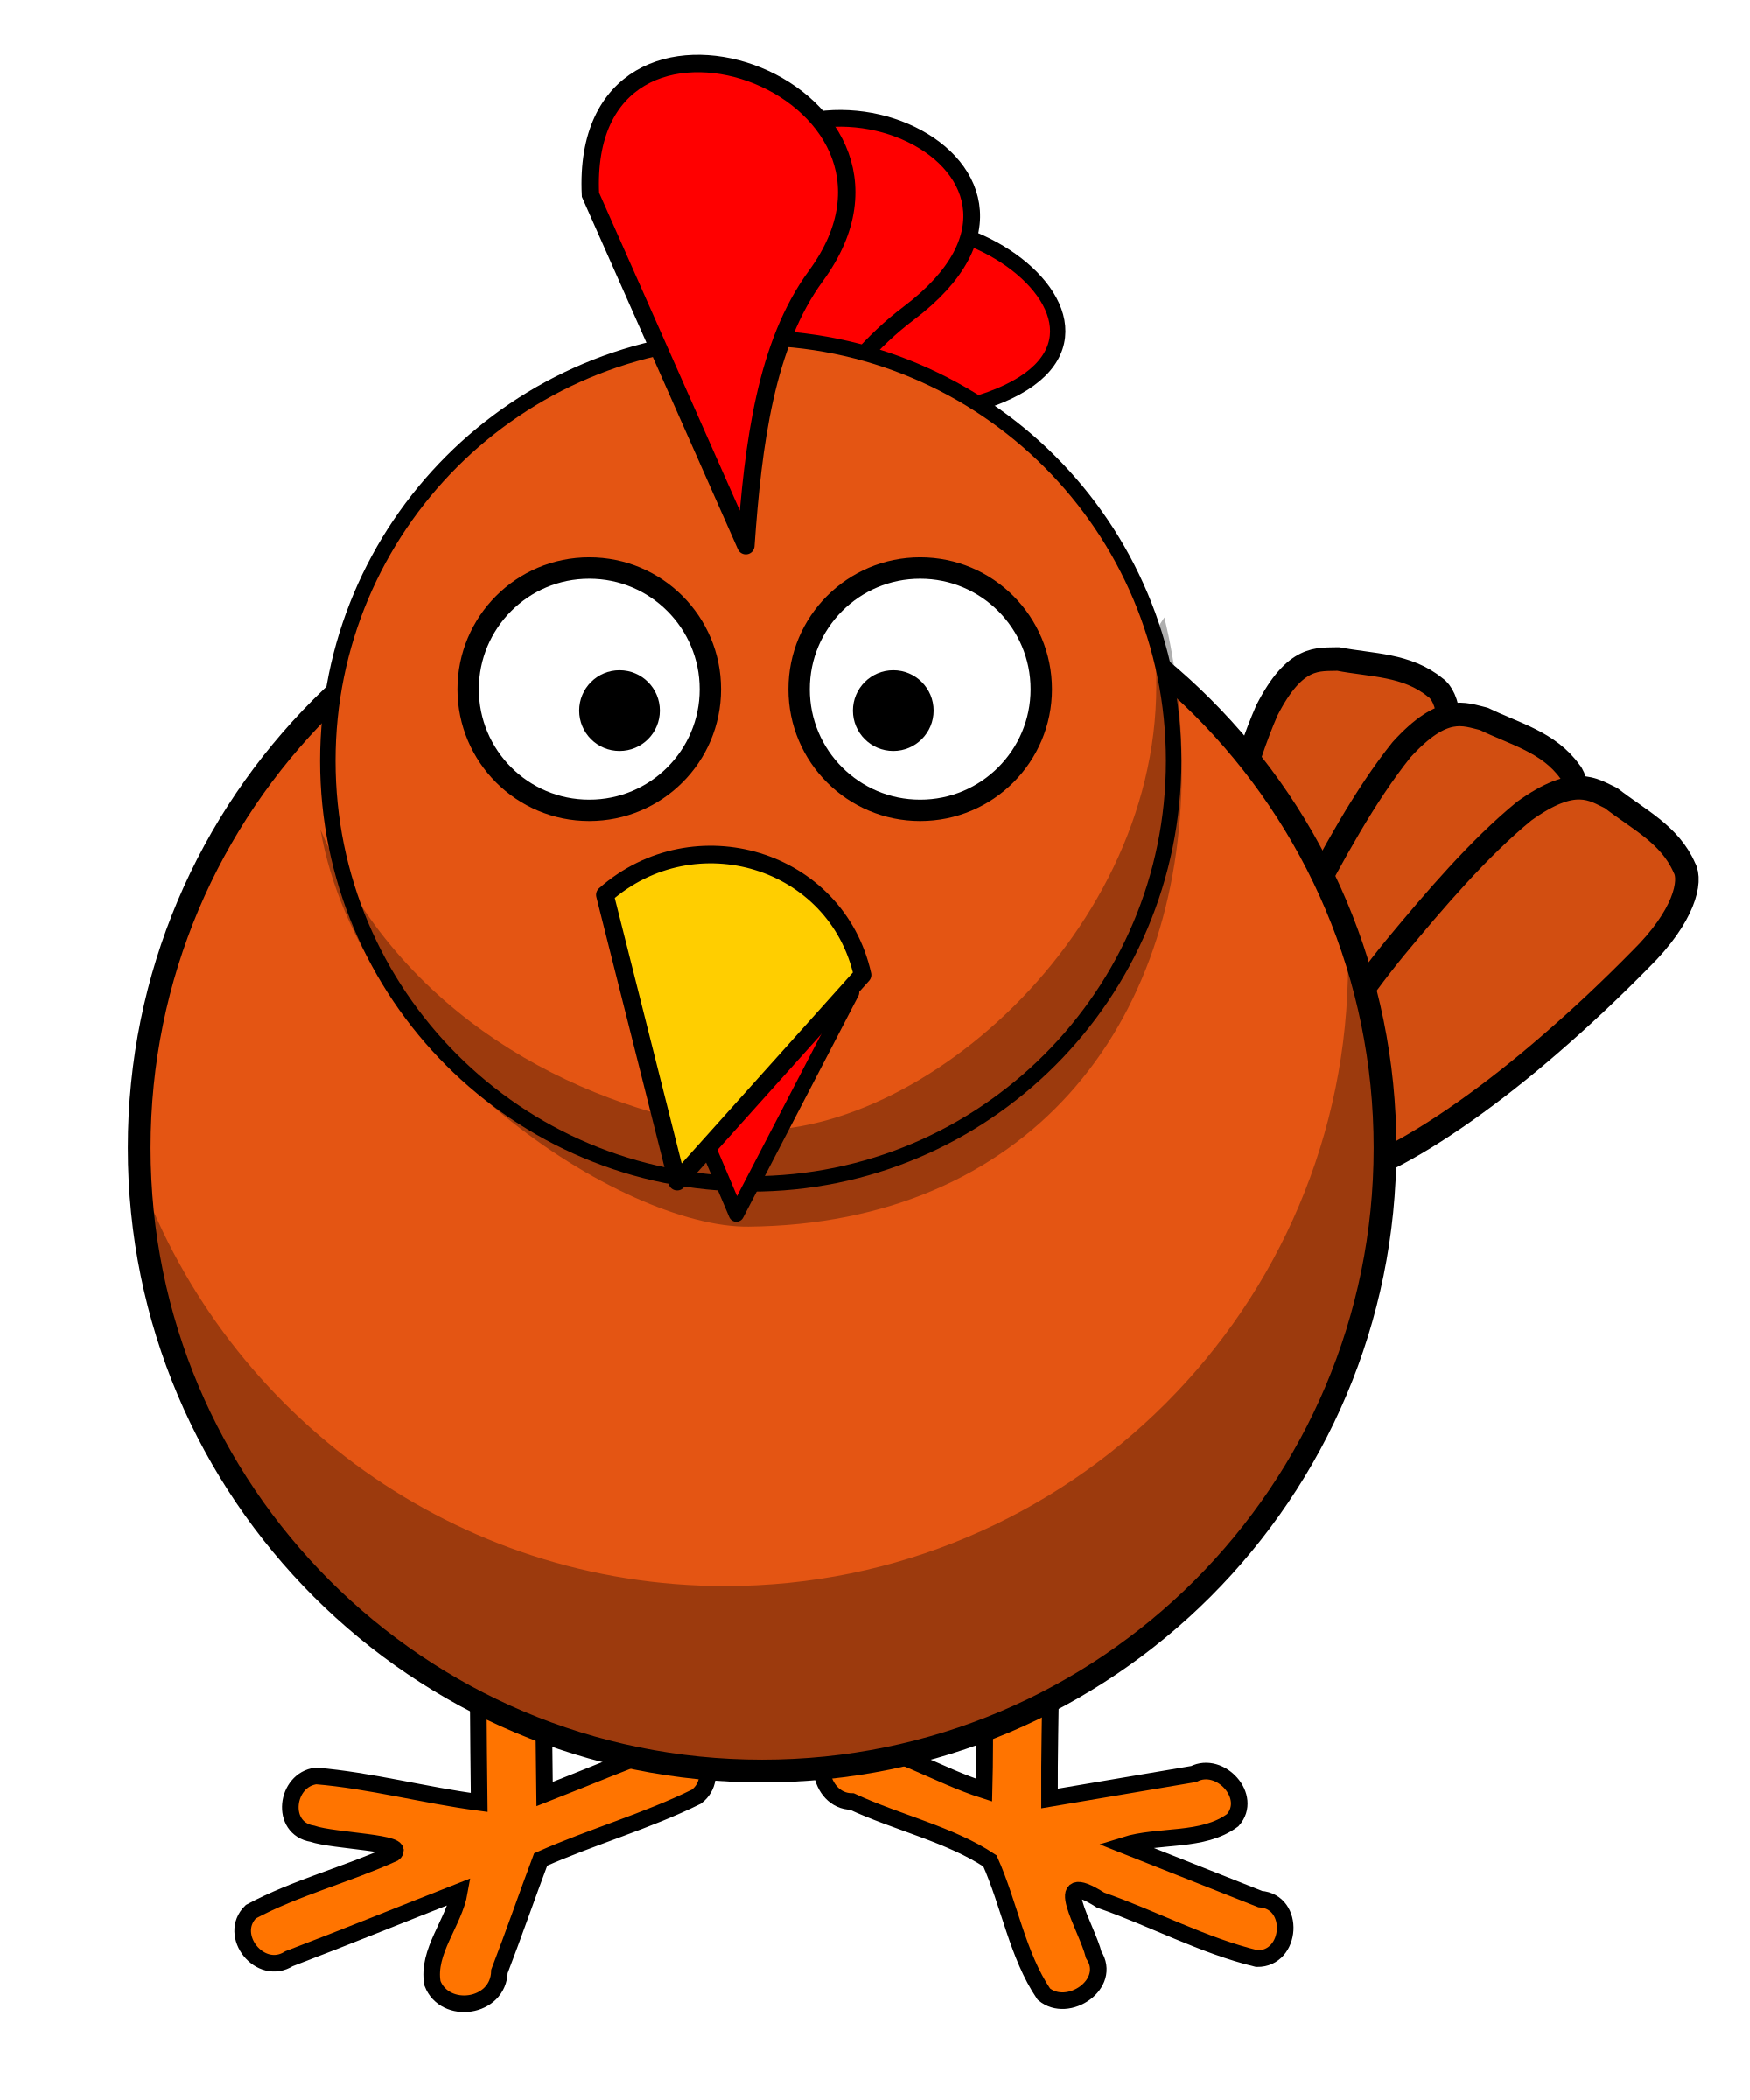 chicken meal clipart - photo #34